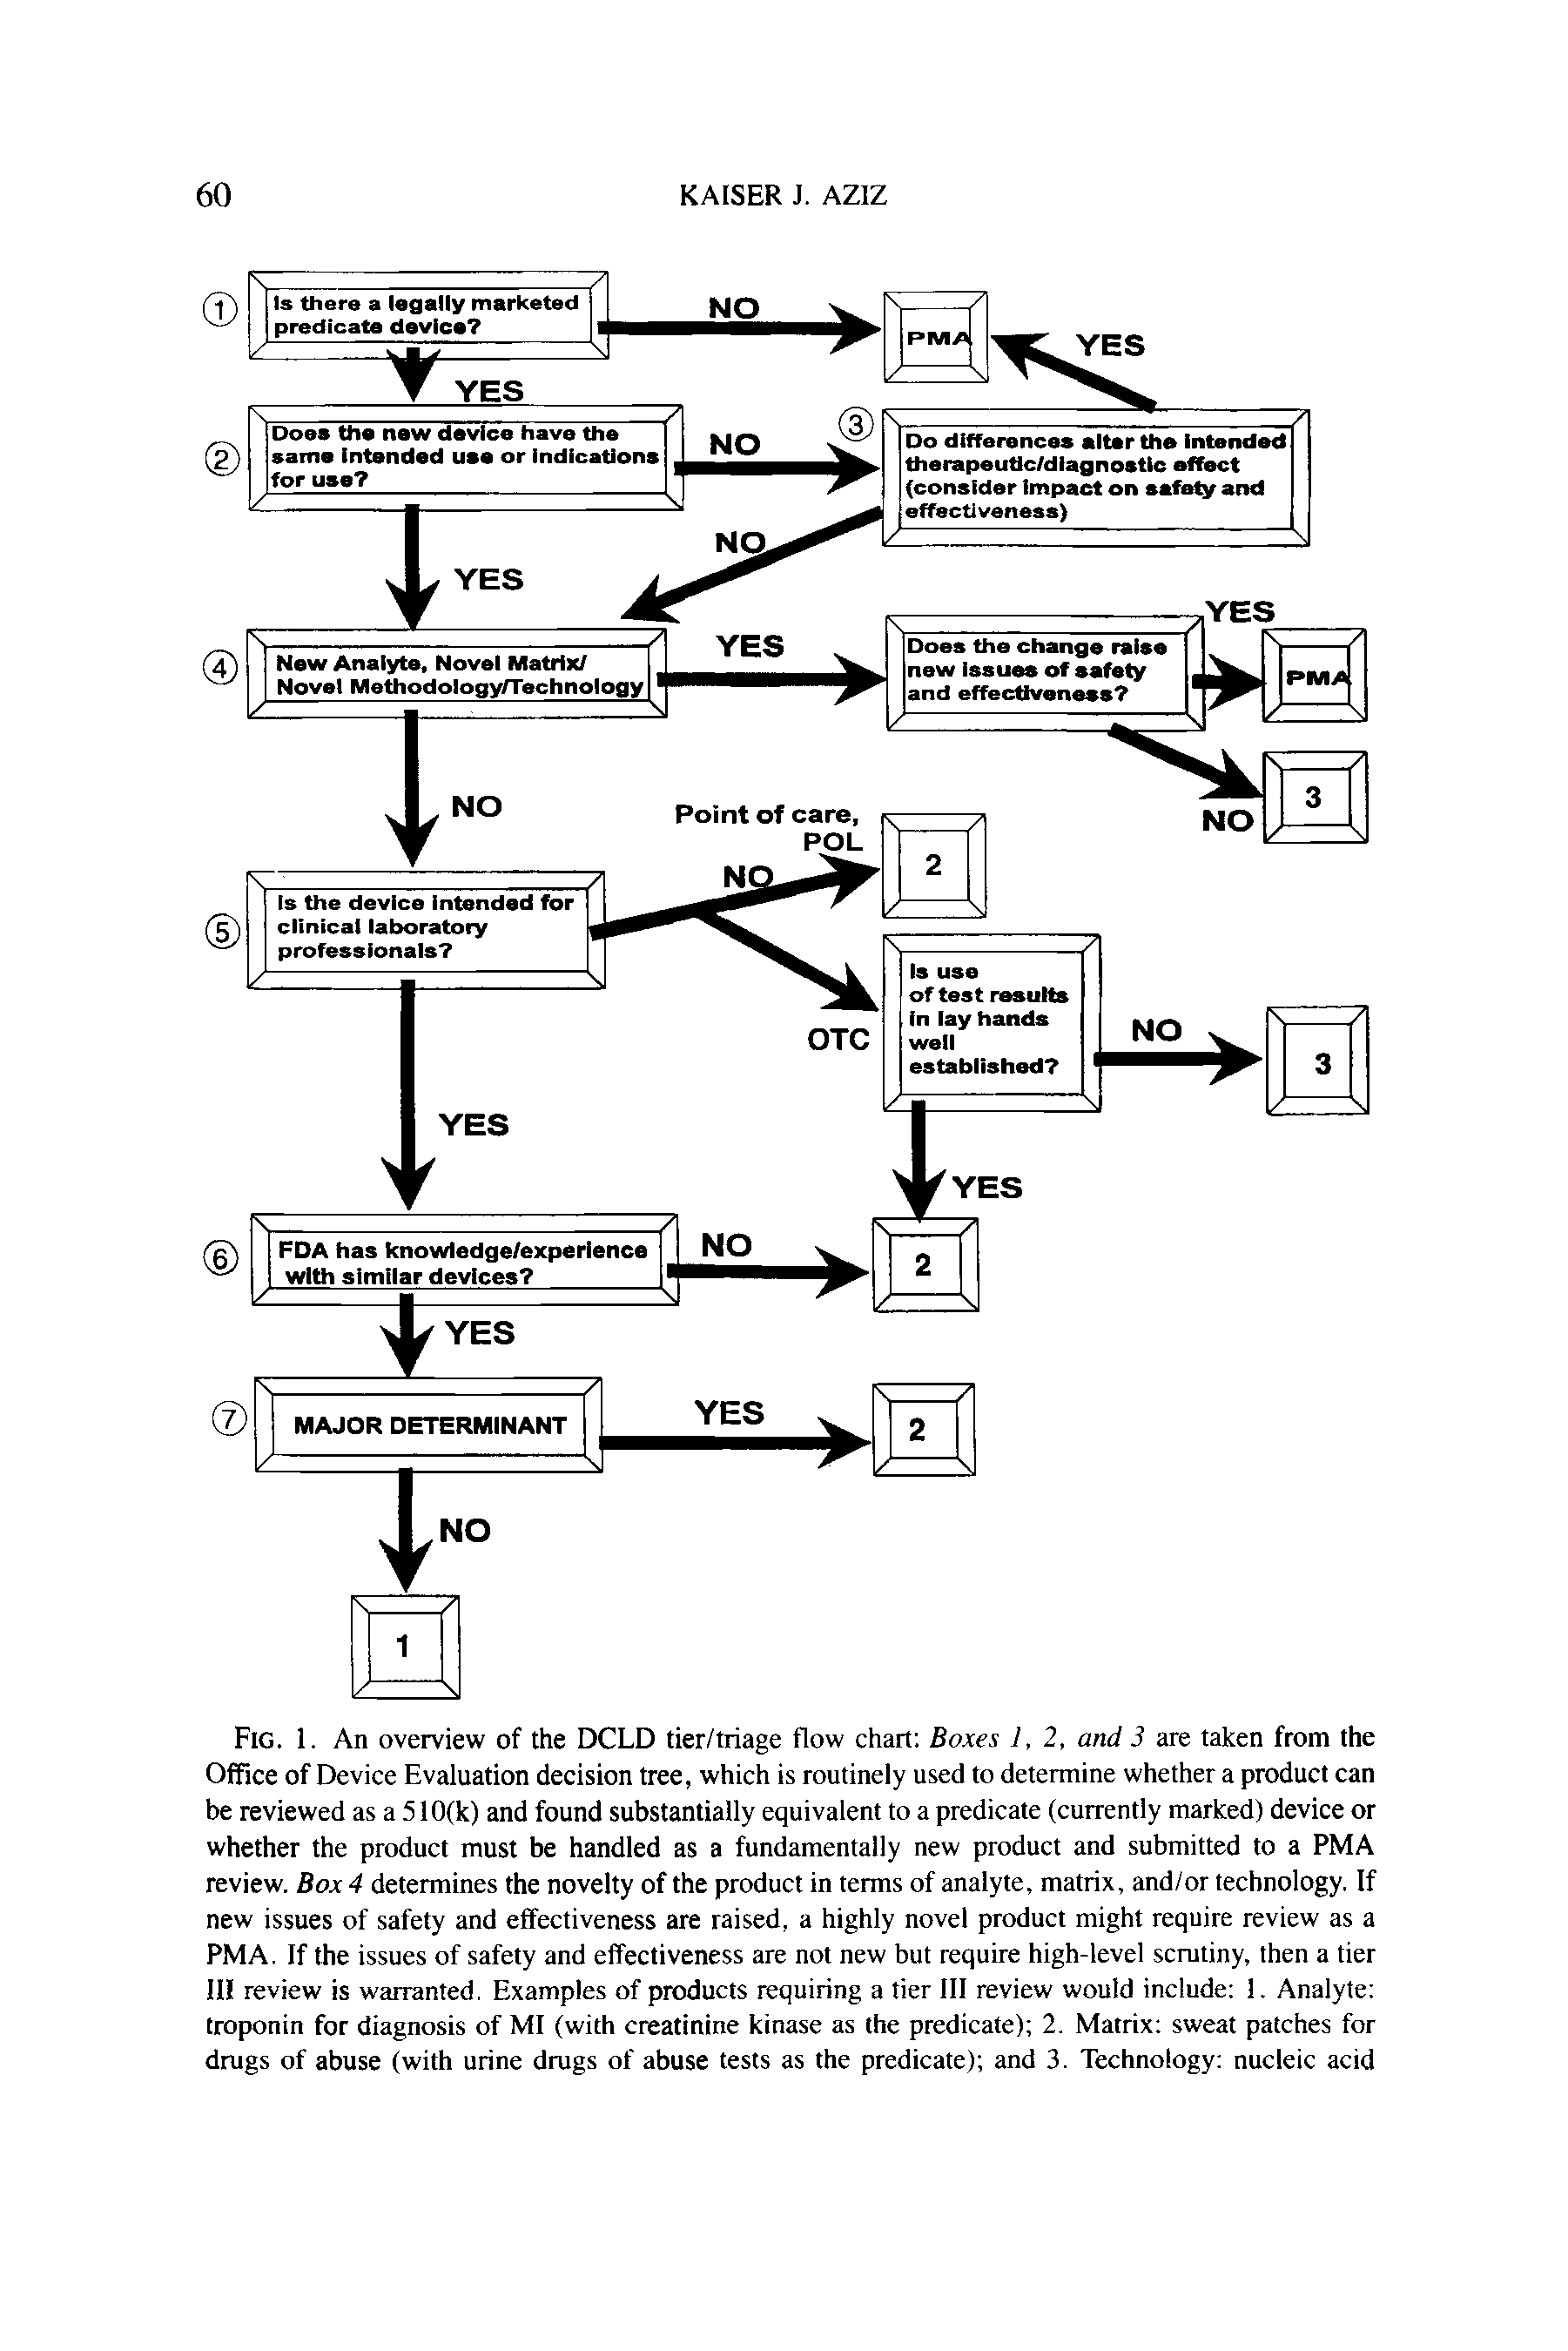 Fig. 1. An overview of the DCLD tier/triage flow chart Boxes 1, 2, and 3 are taken from the Office of Device Evaluation decision tree, which is routinely used to determine whether a product can be reviewed as a 510(k) and found substantially equivalent to a predicate (currently marked) device or whether the product must be handled as a fundamentally new product and submitted to a PMA review. Box 4 determines the novelty of the product in terms of analyte, matrix, and/or technology. If new issues of safety and effectiveness are raised, a highly novel product might require review as a PMA. If the issues of safety and effectiveness are not new but require high-level scrutiny, then a tier III review is warranted. Examples of products requiring a tier III review would include 1. Analyte troponin for diagnosis of MI (with creatinine kinase as the predicate) 2. Matrix sweat patches for drugs of abuse (with urine drugs of abuse tests as the predicate) and 3. Technology nucleic acid...